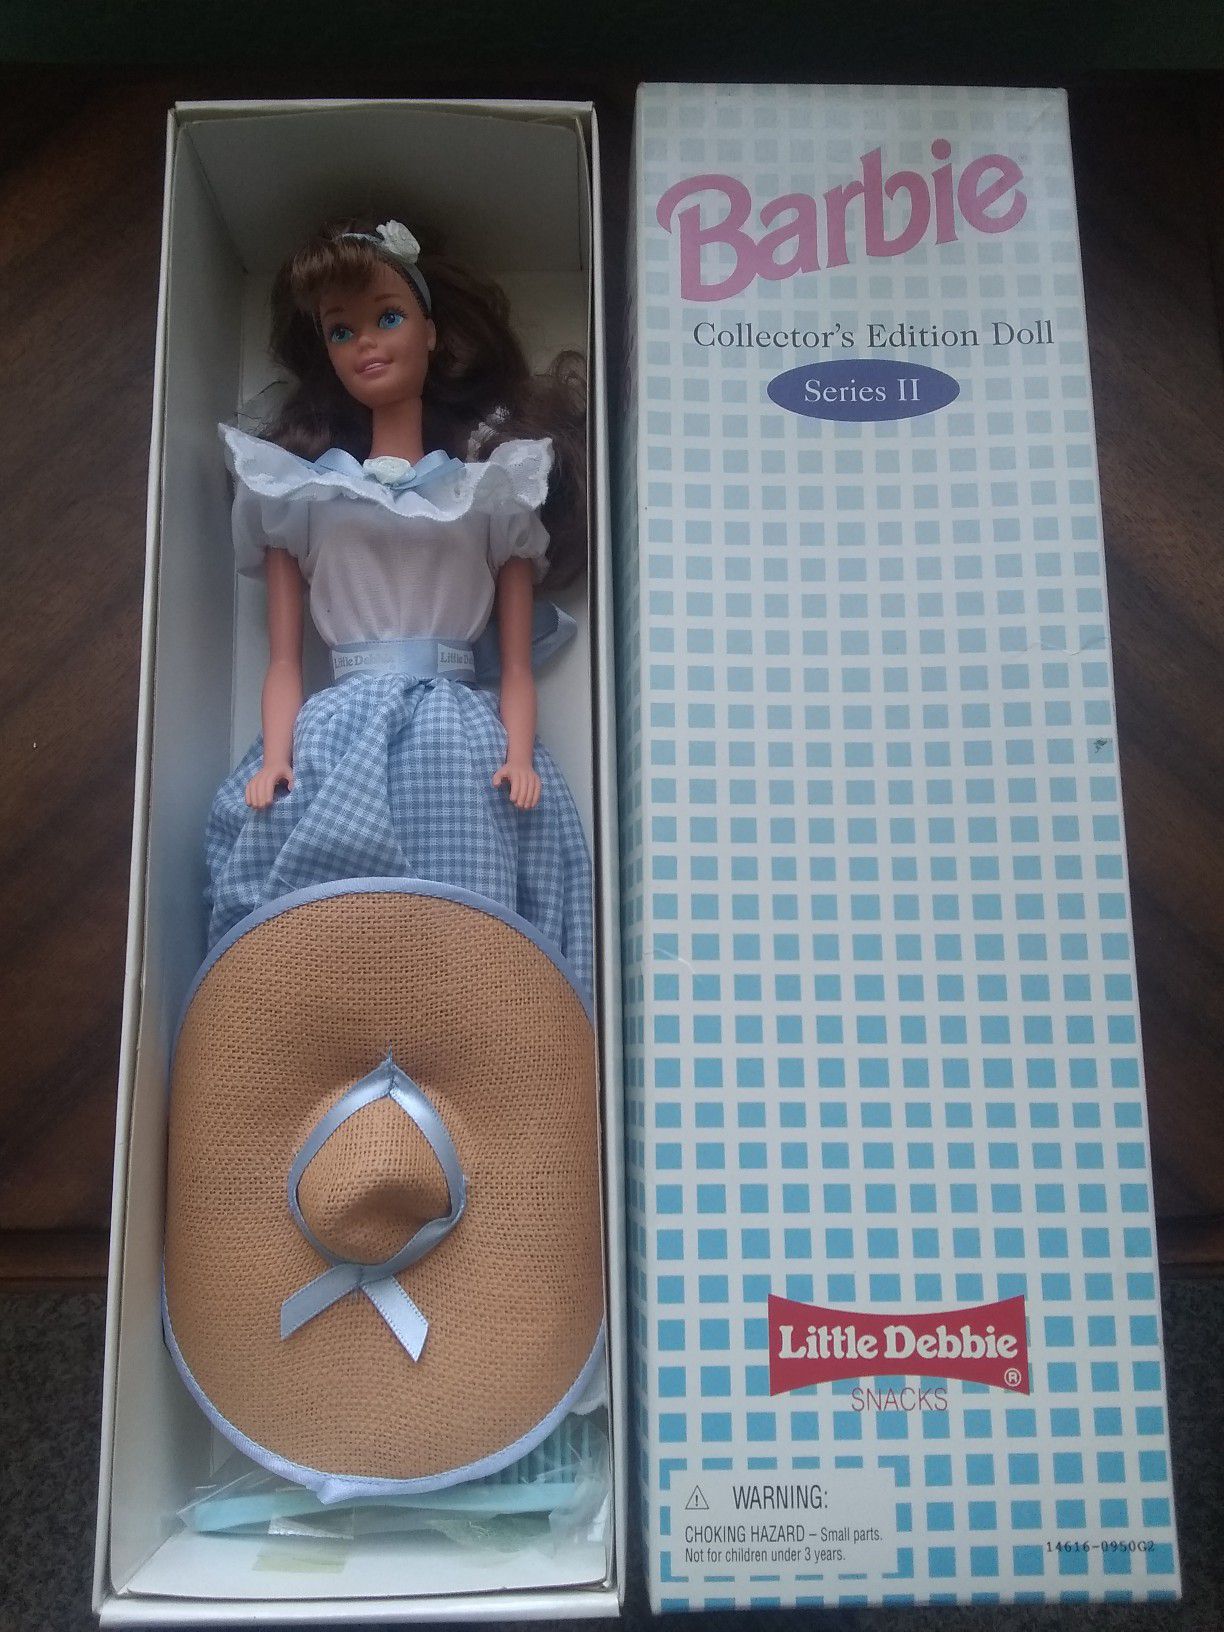 Barbie Collector's Edition from Little Debbie